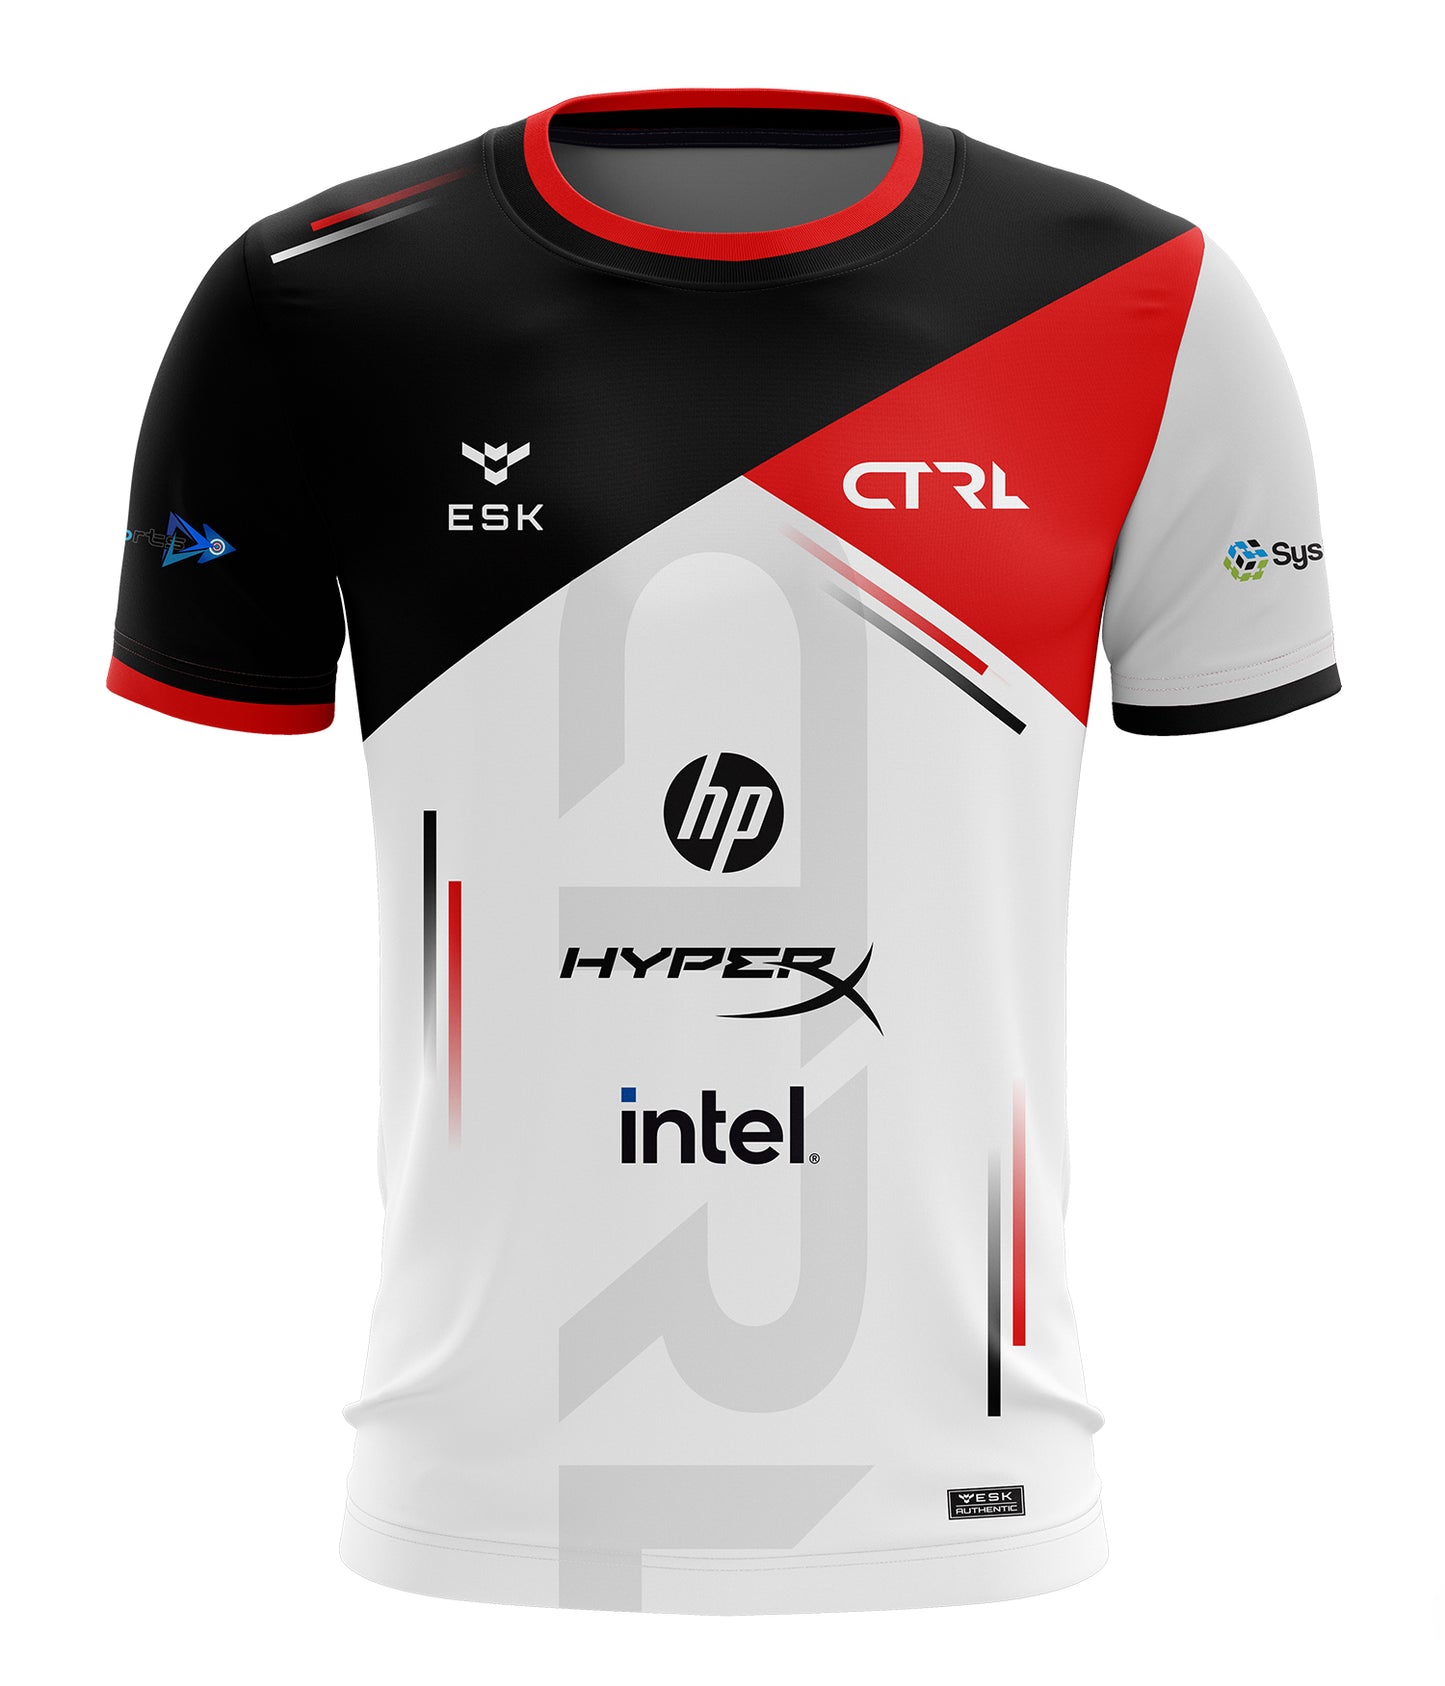 CTRL Esports Jersey - with Gamertag